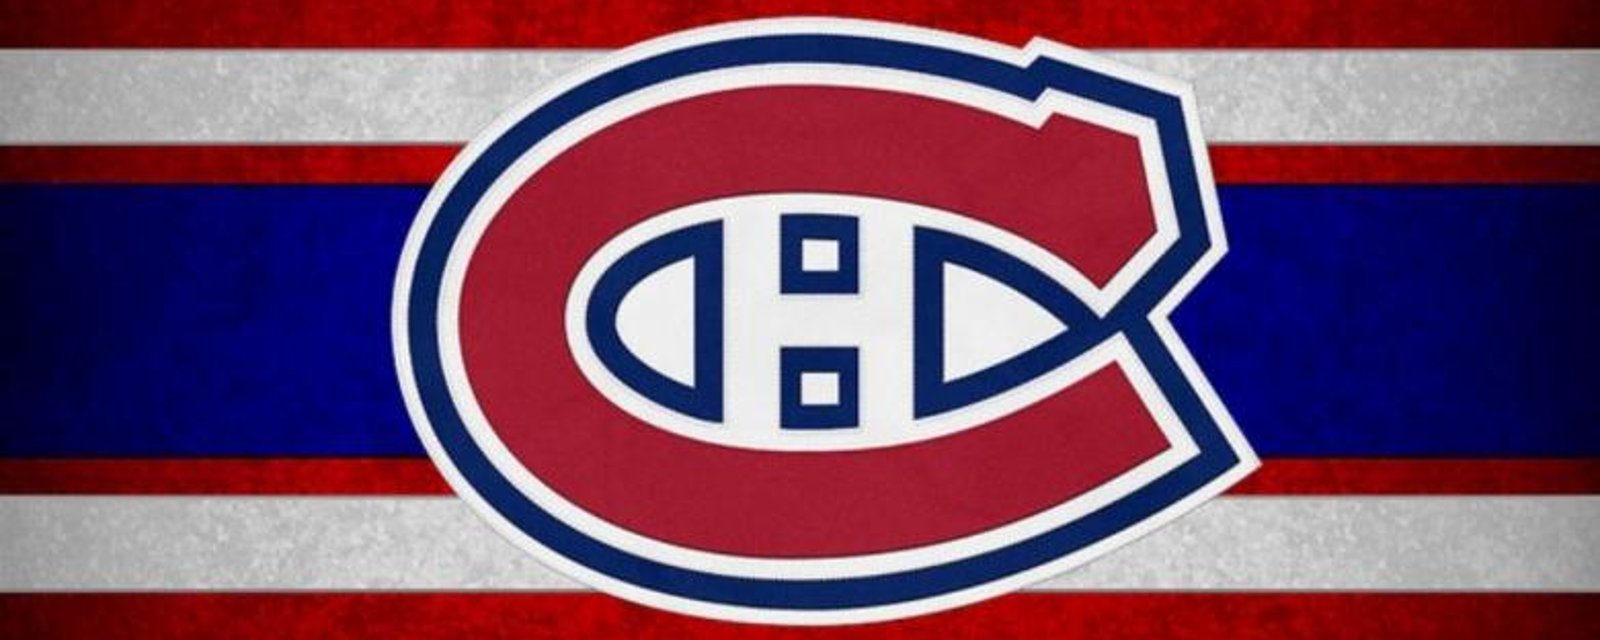 Canadiens forced to apologize for vile racial slurs made by organization.